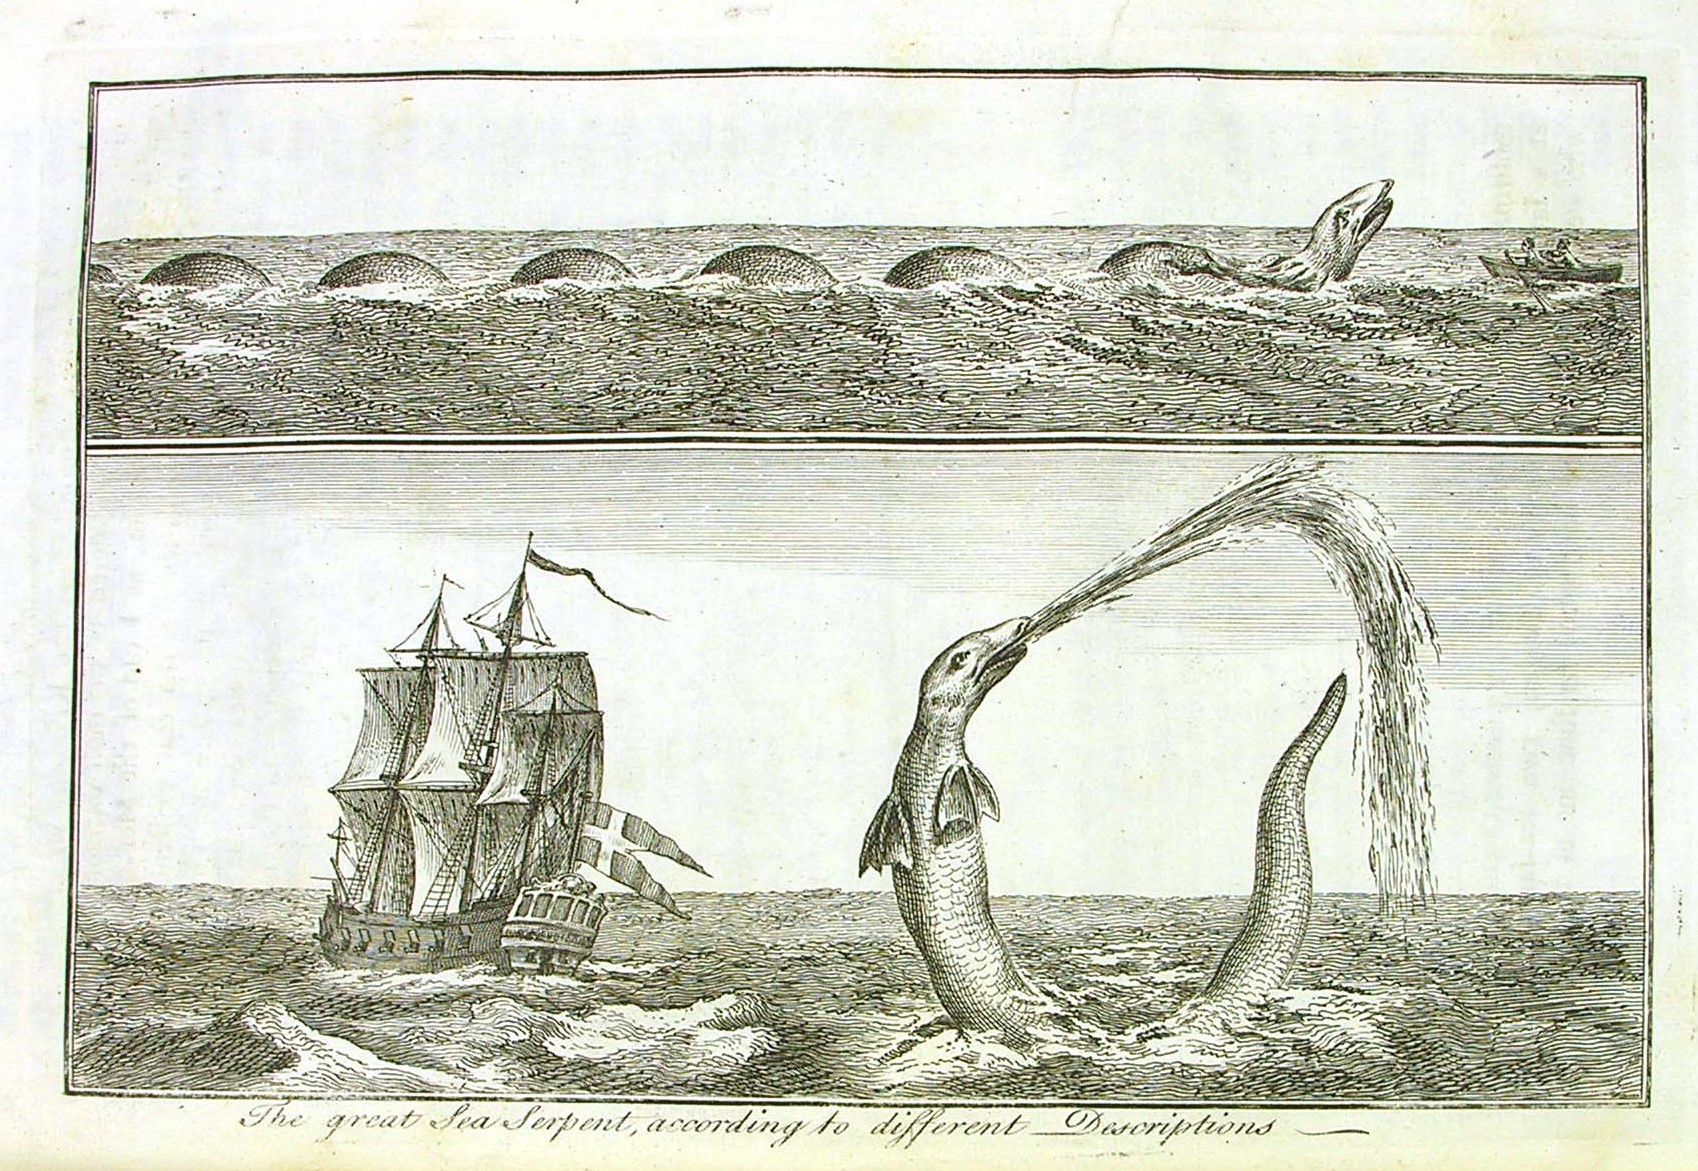 An illustration of a sea serpent from an early printed book.